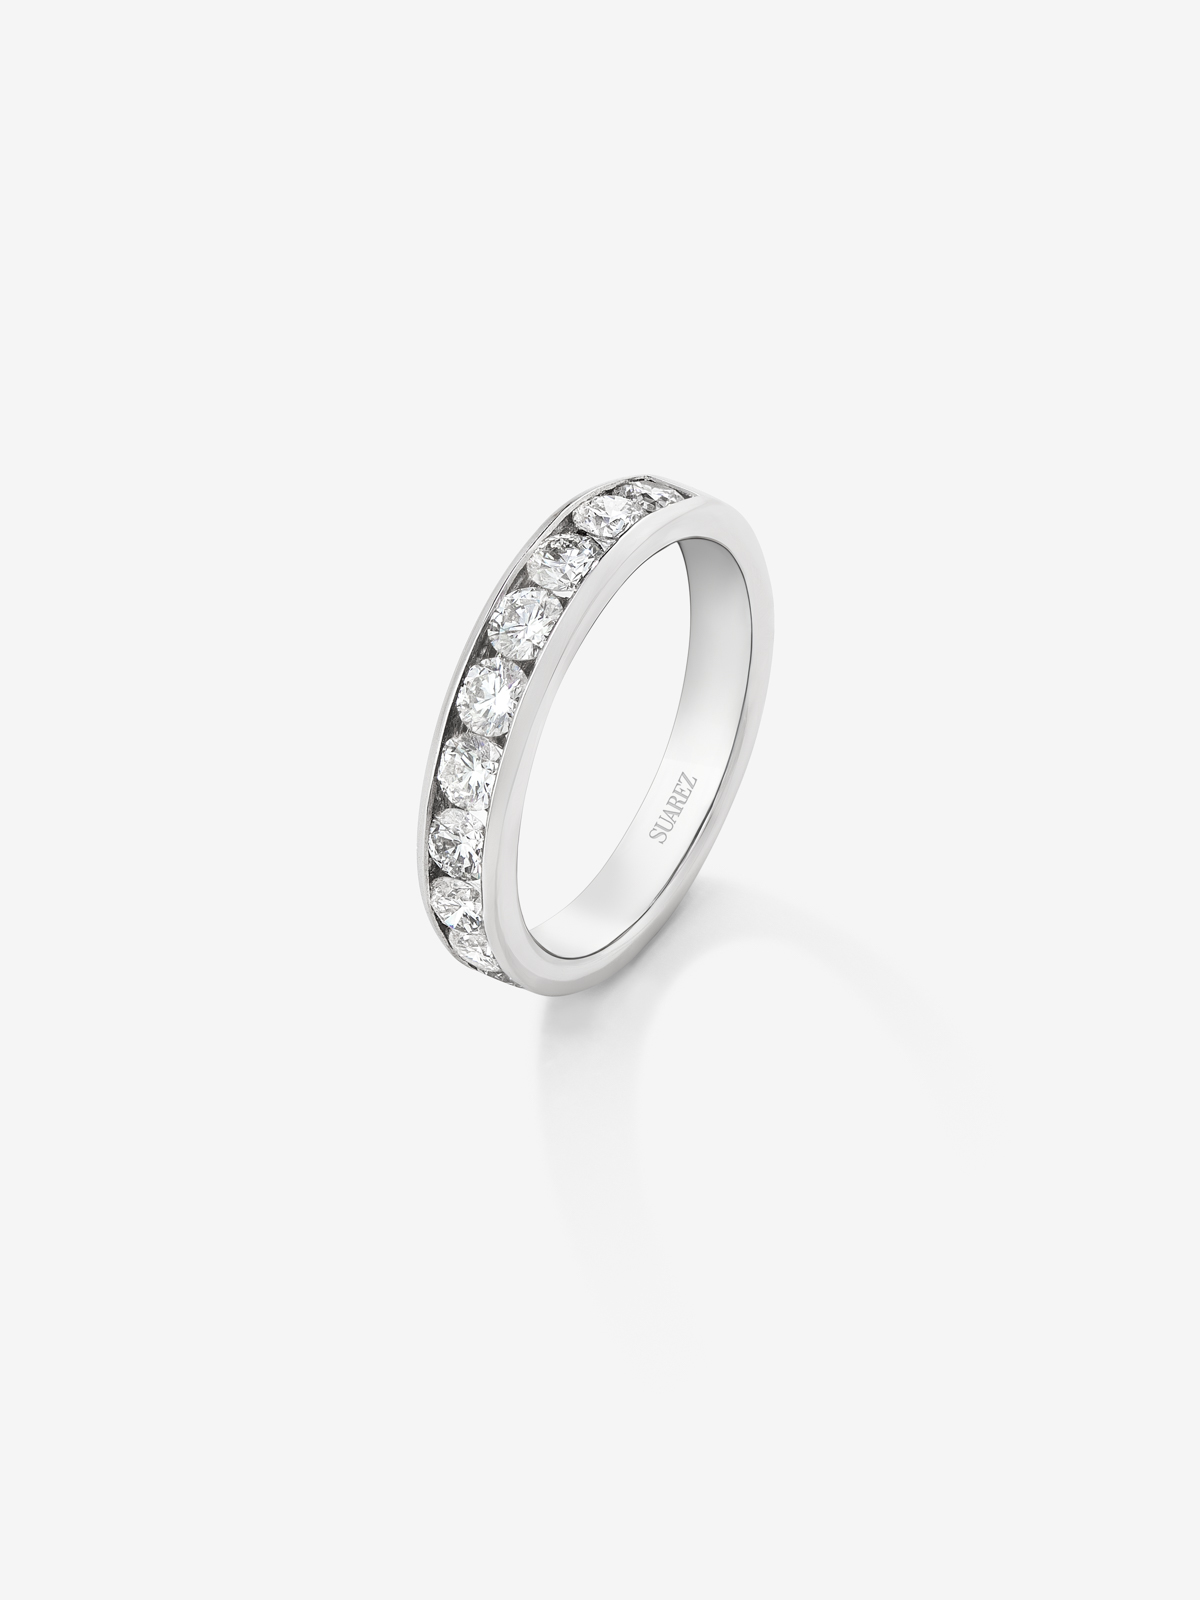 18K white gold half-eternity engagement ring with diamond band.